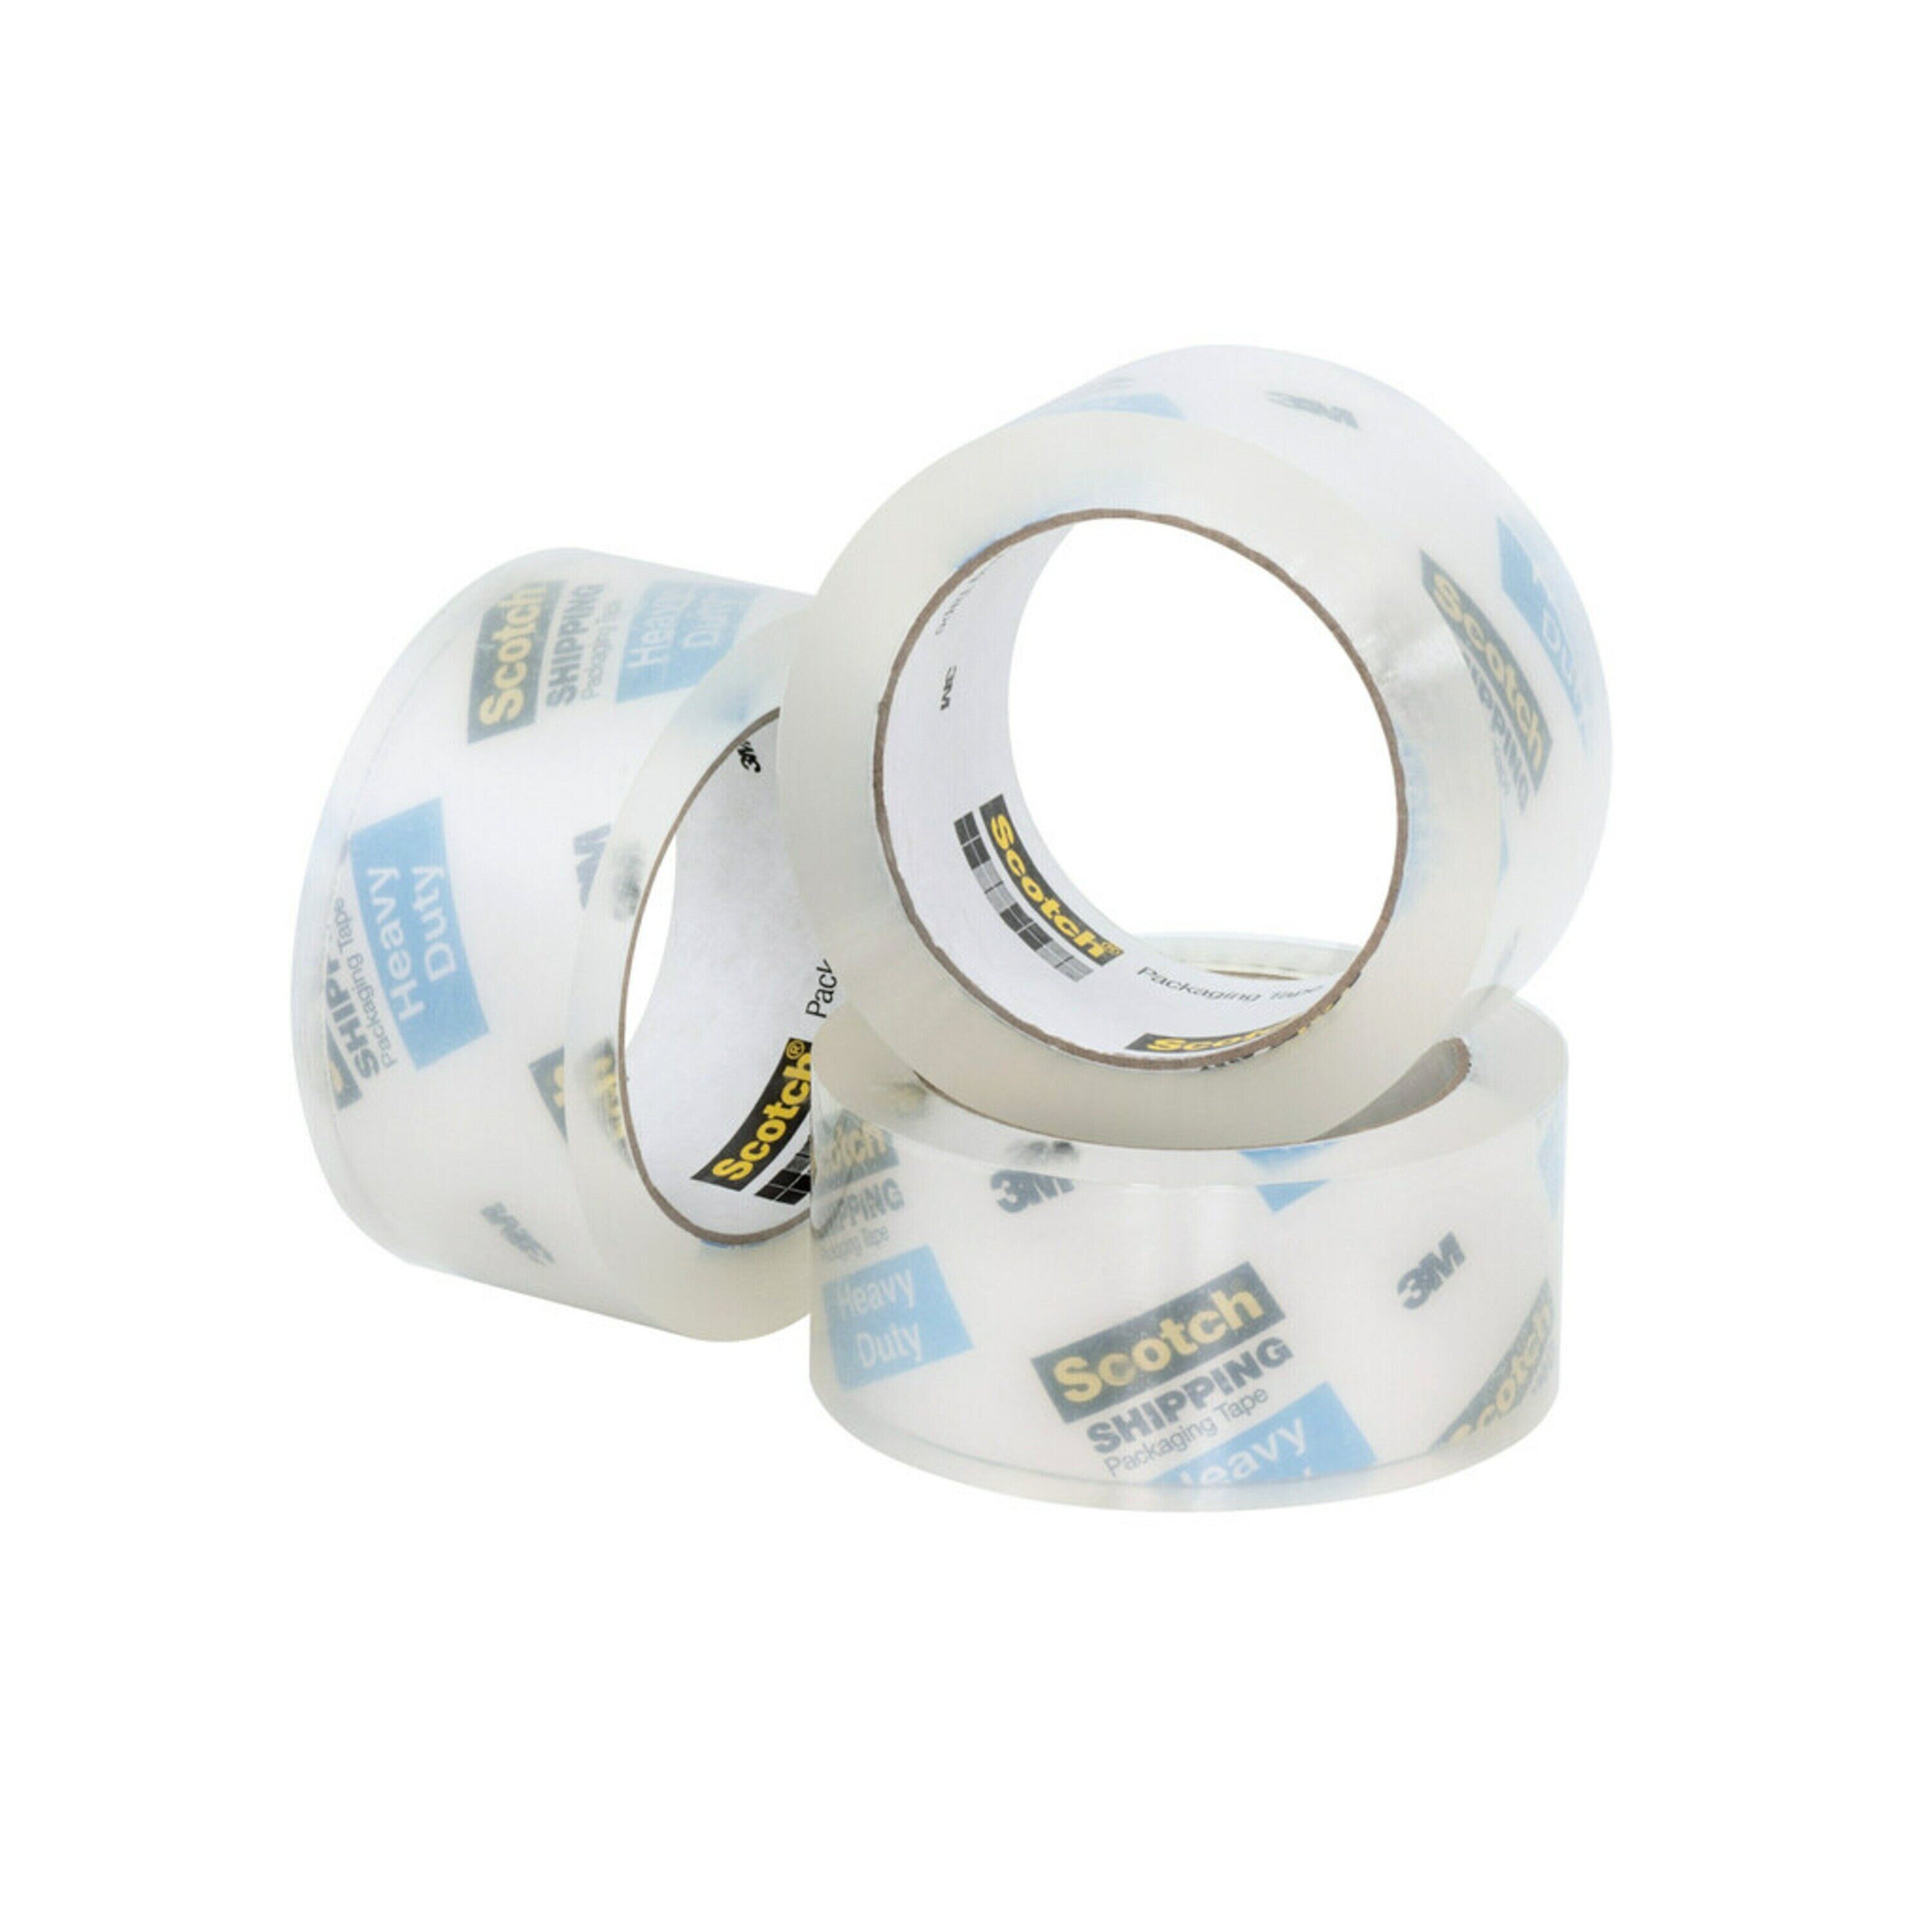 Scotch® 3M 54.6 Yards Heavy-Duty Shipping and Packaging Tape with